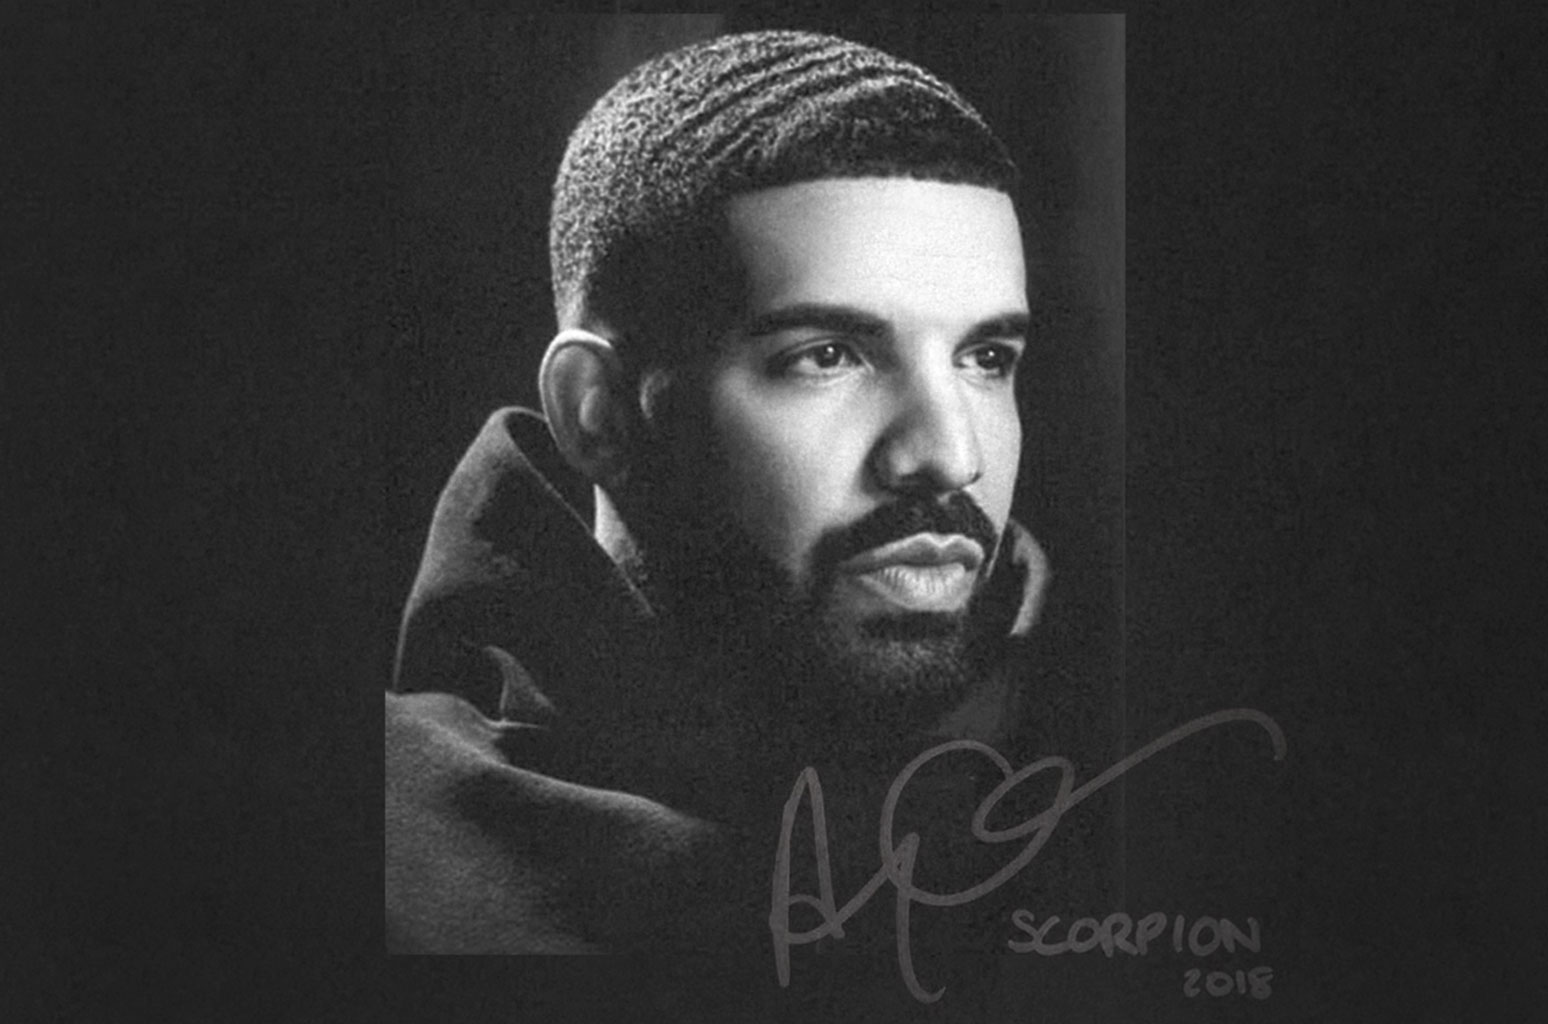 Drake new release - "Scorpion" Side A